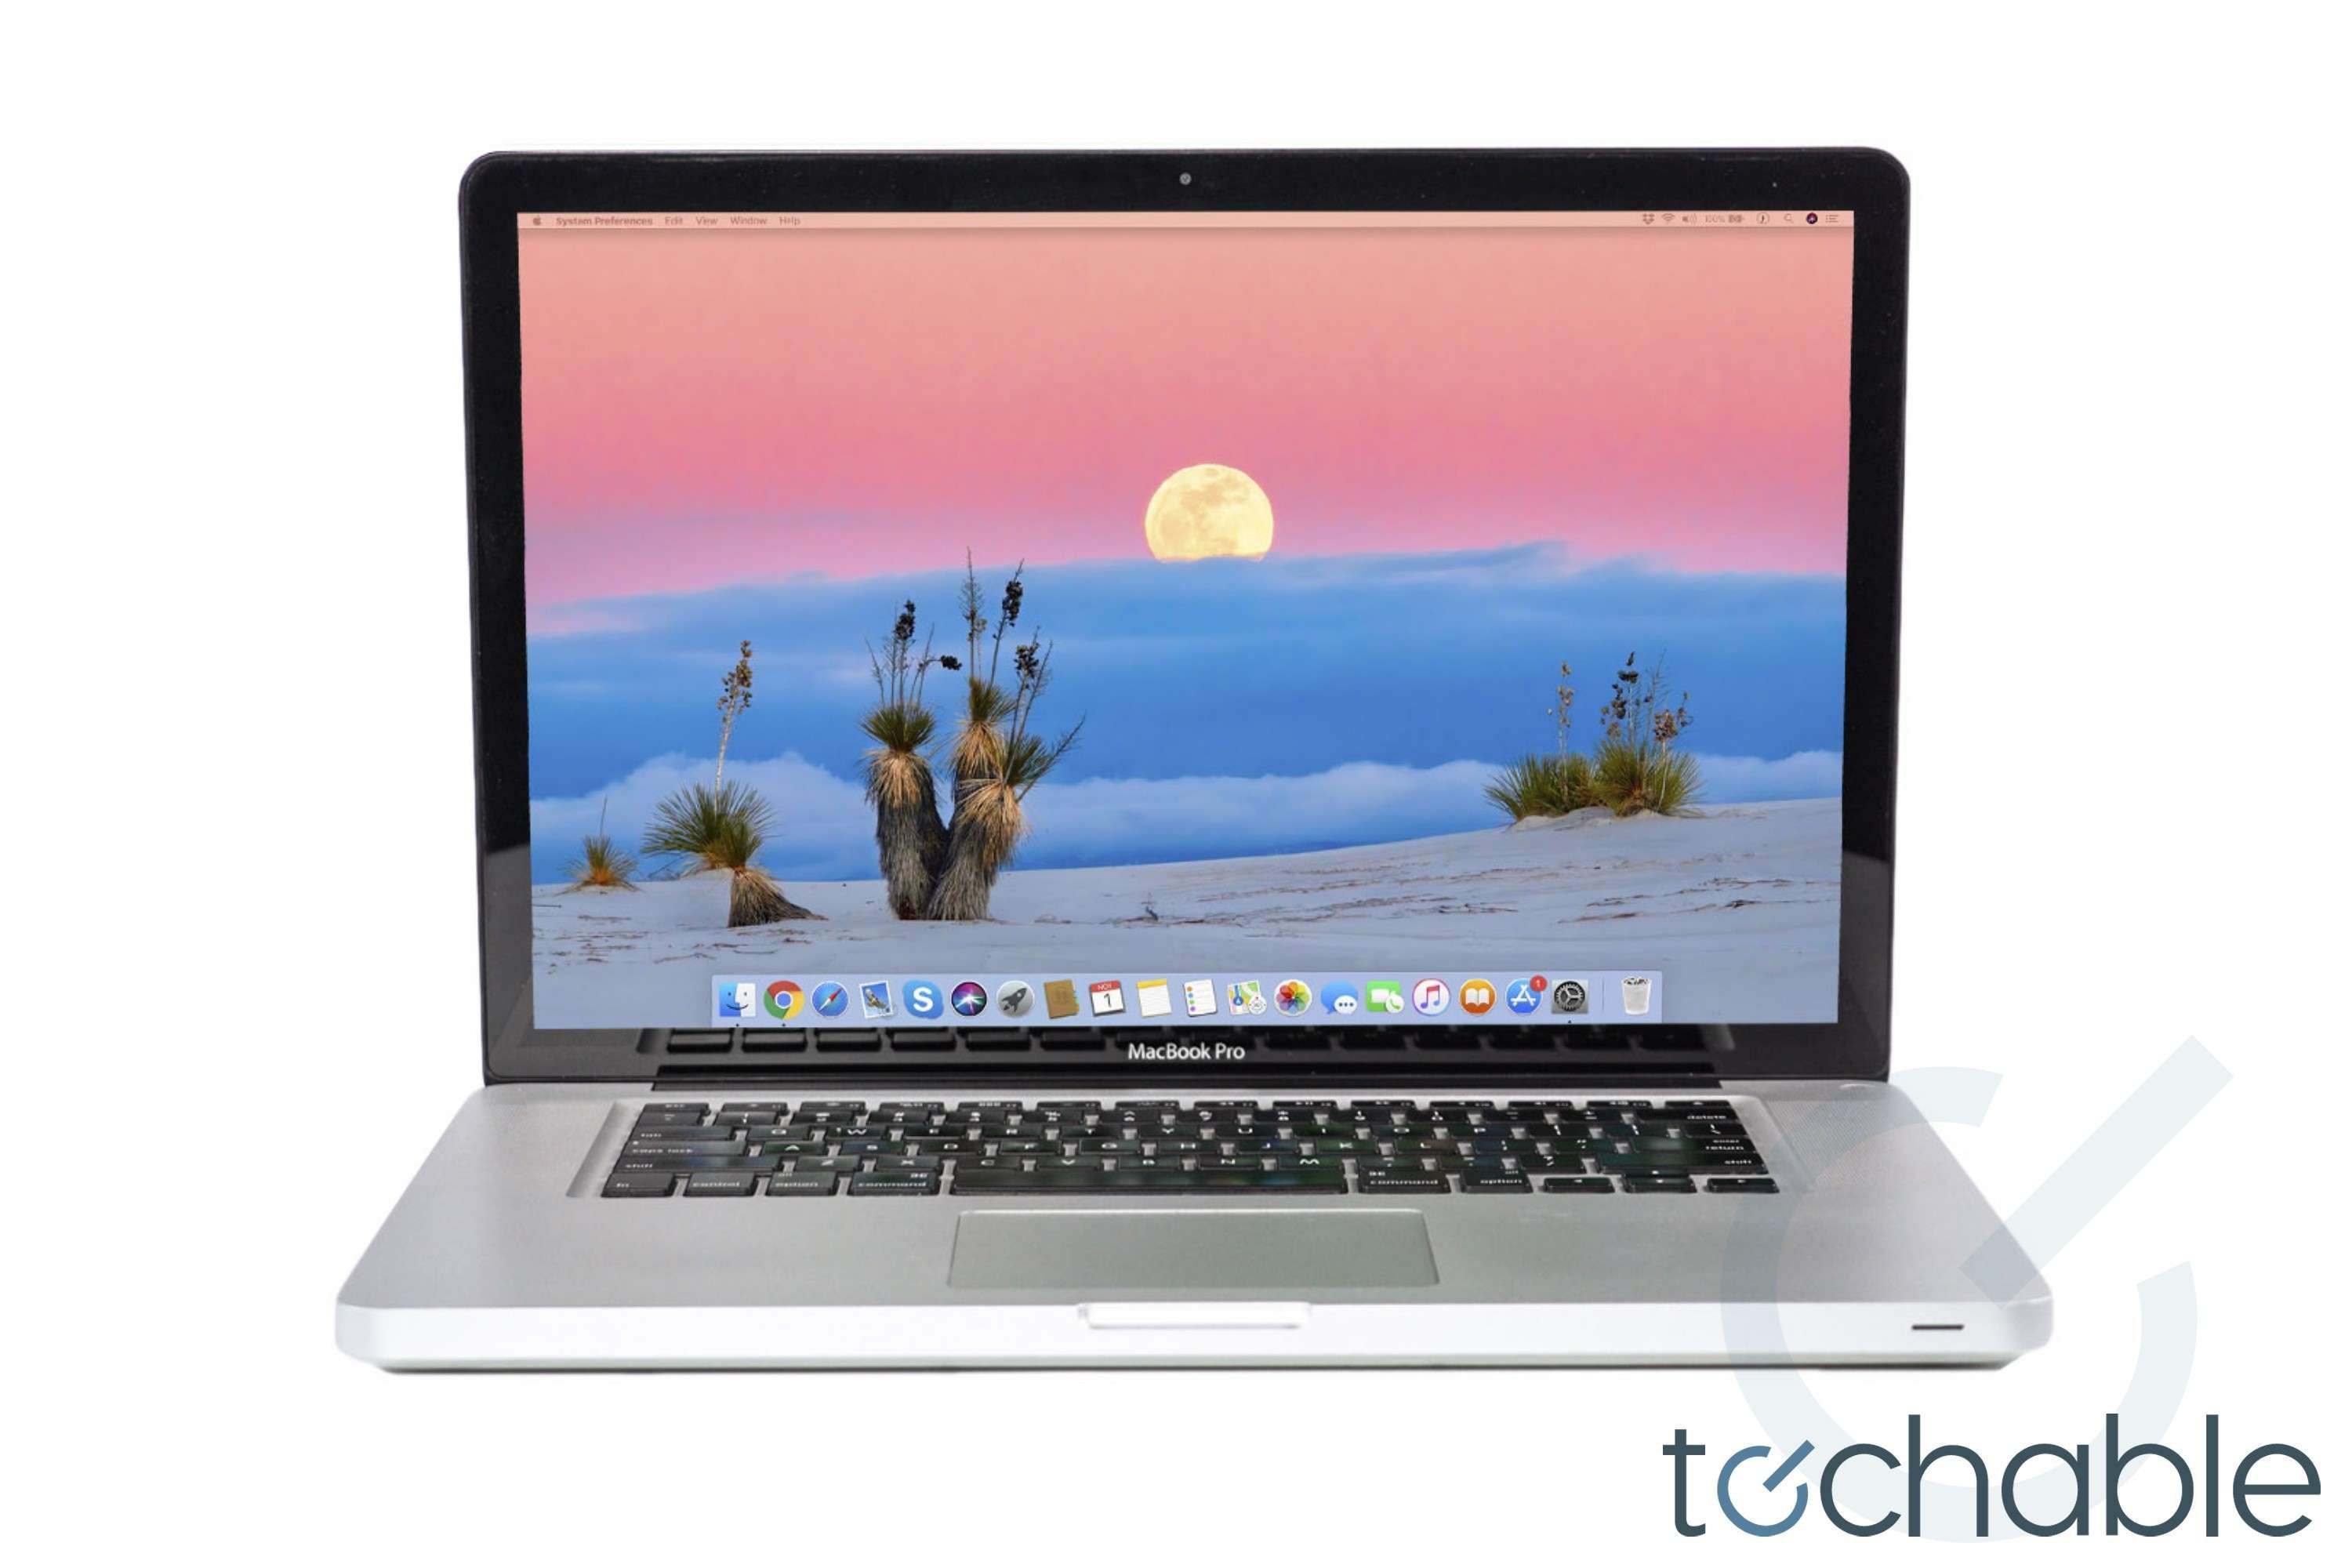 17 inch Macbook Pro | Refurbished and Used 17 inch Macbook Pro